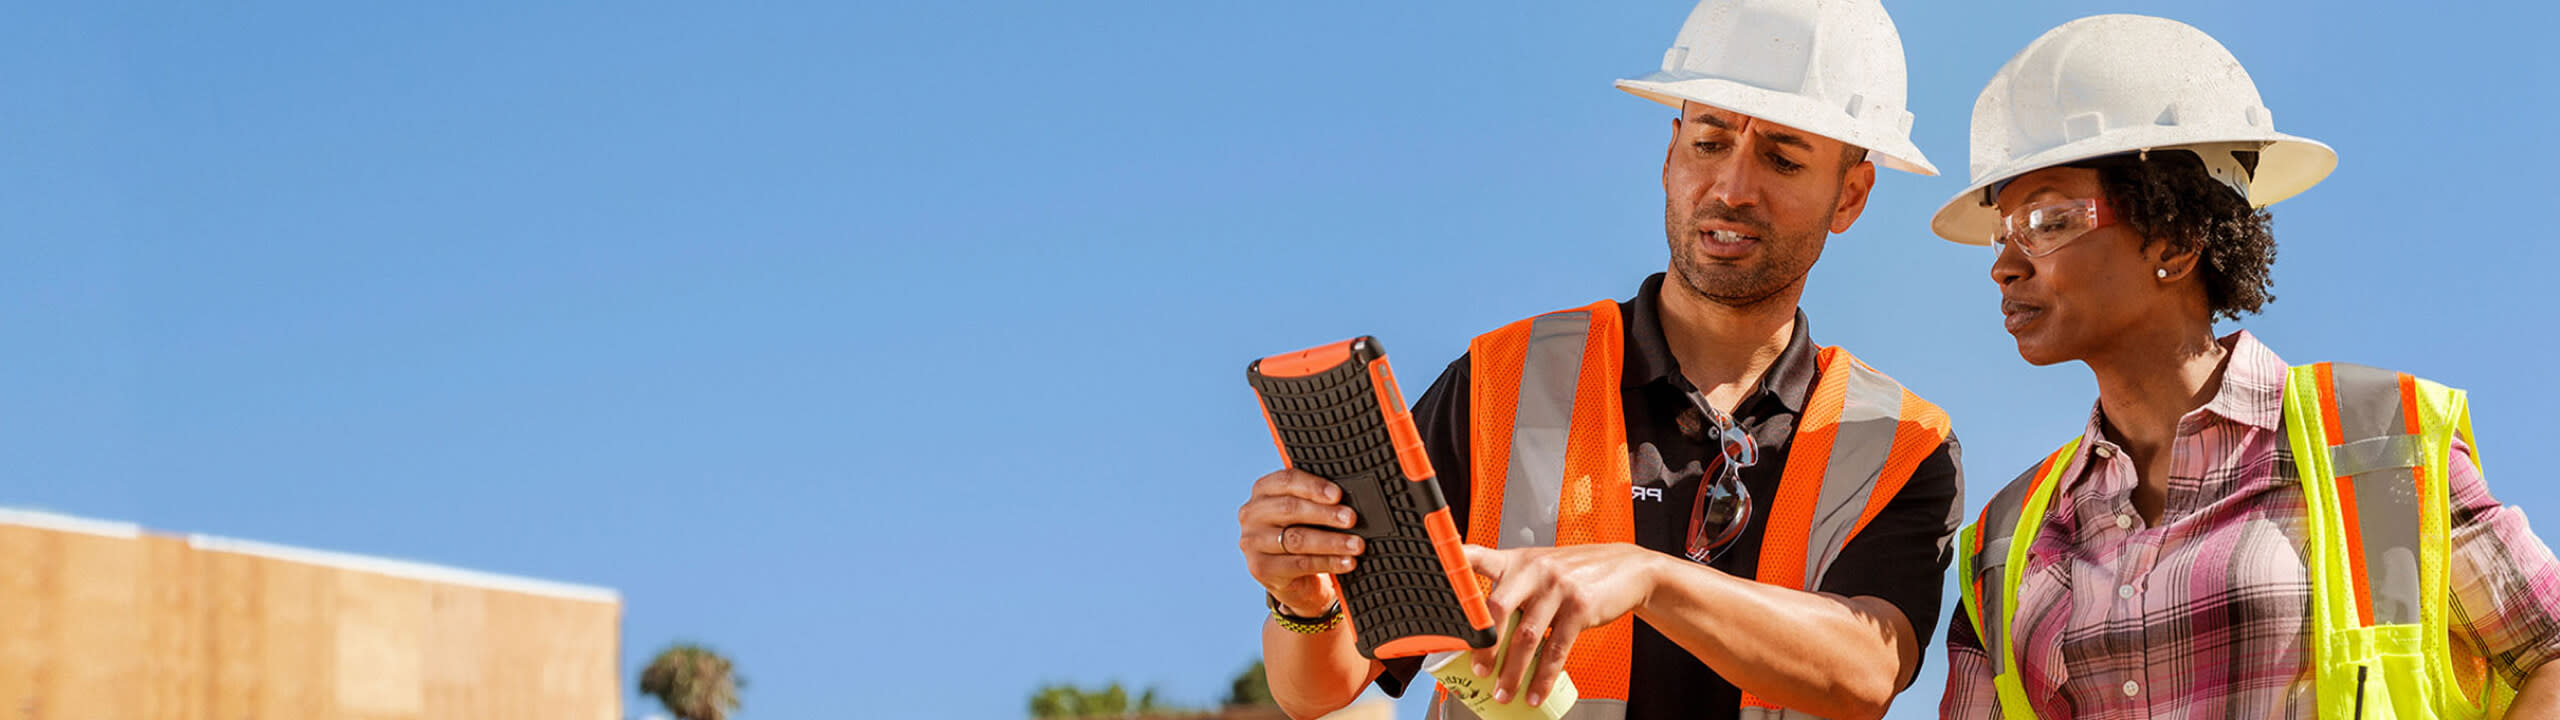 Construction workers using Procore on an iPad on a jobsite